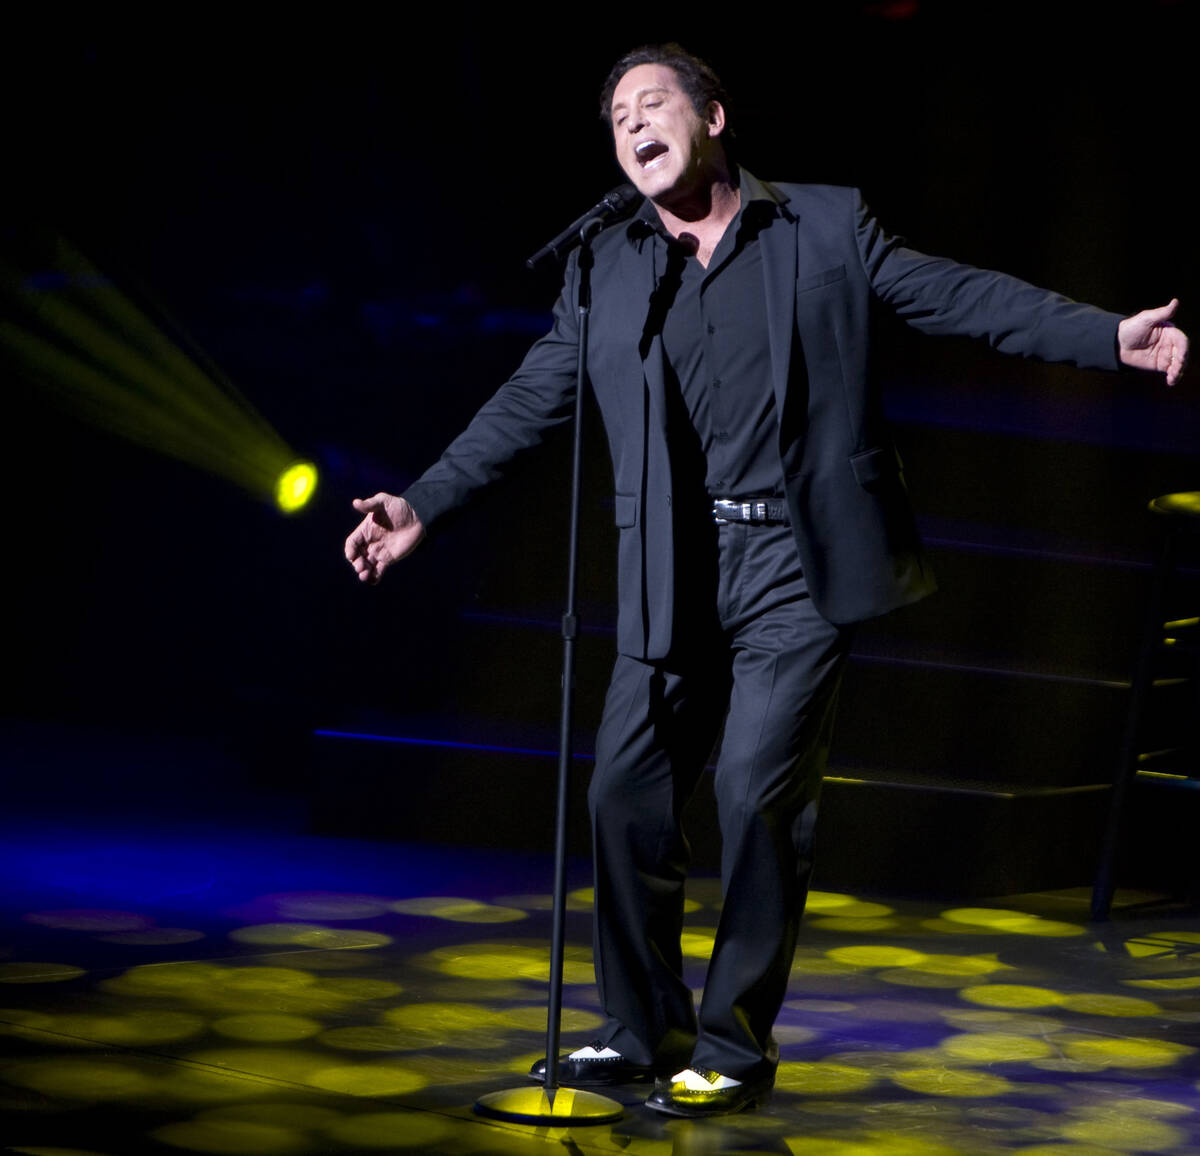 Danny Gans performs at the Encore Theater on Feb. 6, 2009. (Jeff Scheid/Las Vegas Review-Journ ...